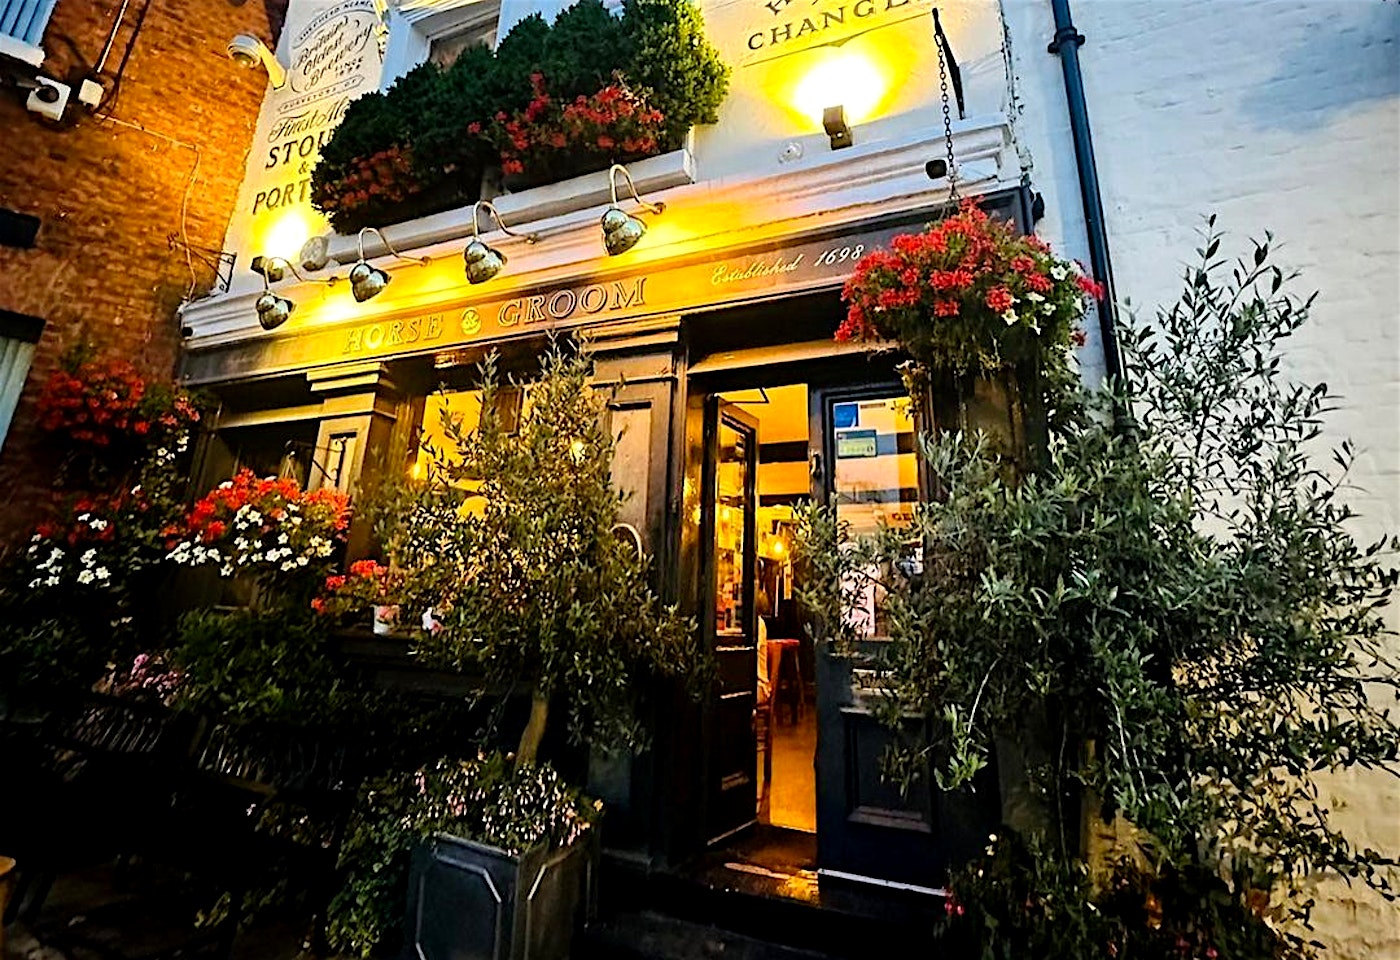 exterior of the horse and groom belgravia london bar